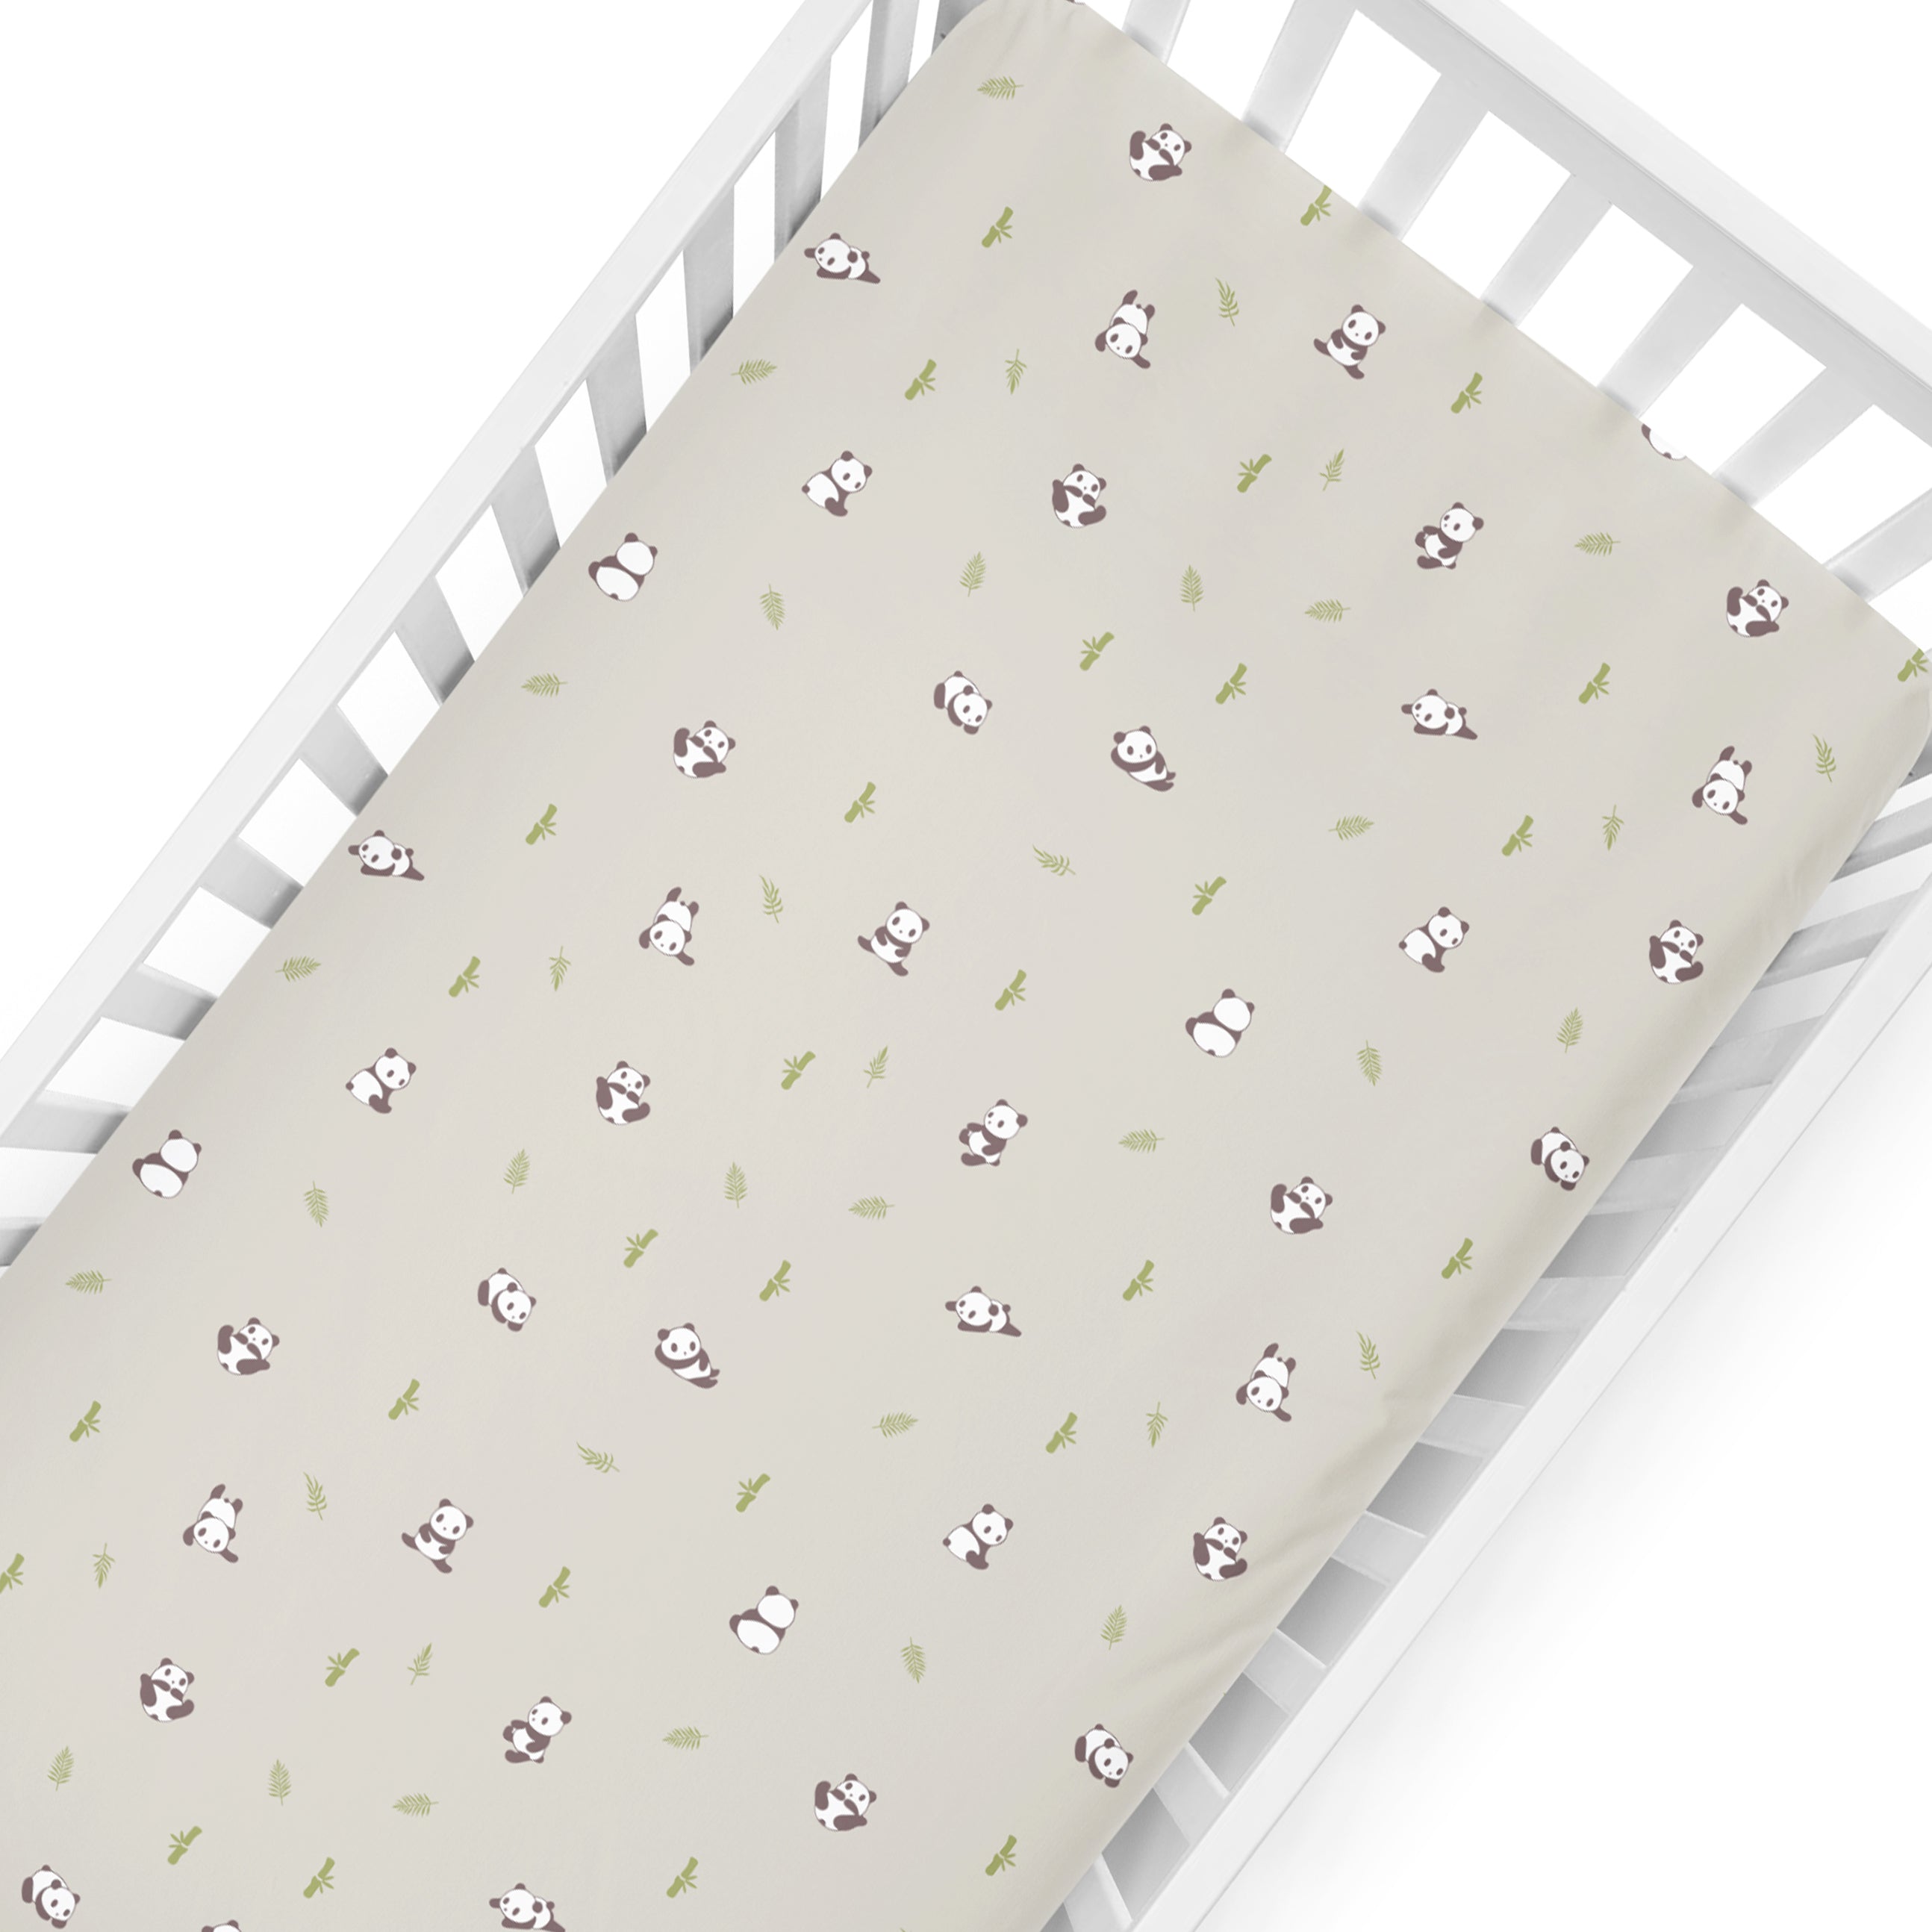 The White Cradle Flat Bed Sheet for Baby Cot & Mattress - Pure Organic Cotton - Extra Large, Super Soft & Smooth, Absorbent, Breathable Twill Fabric for Infants & Newborns - Grey Panda